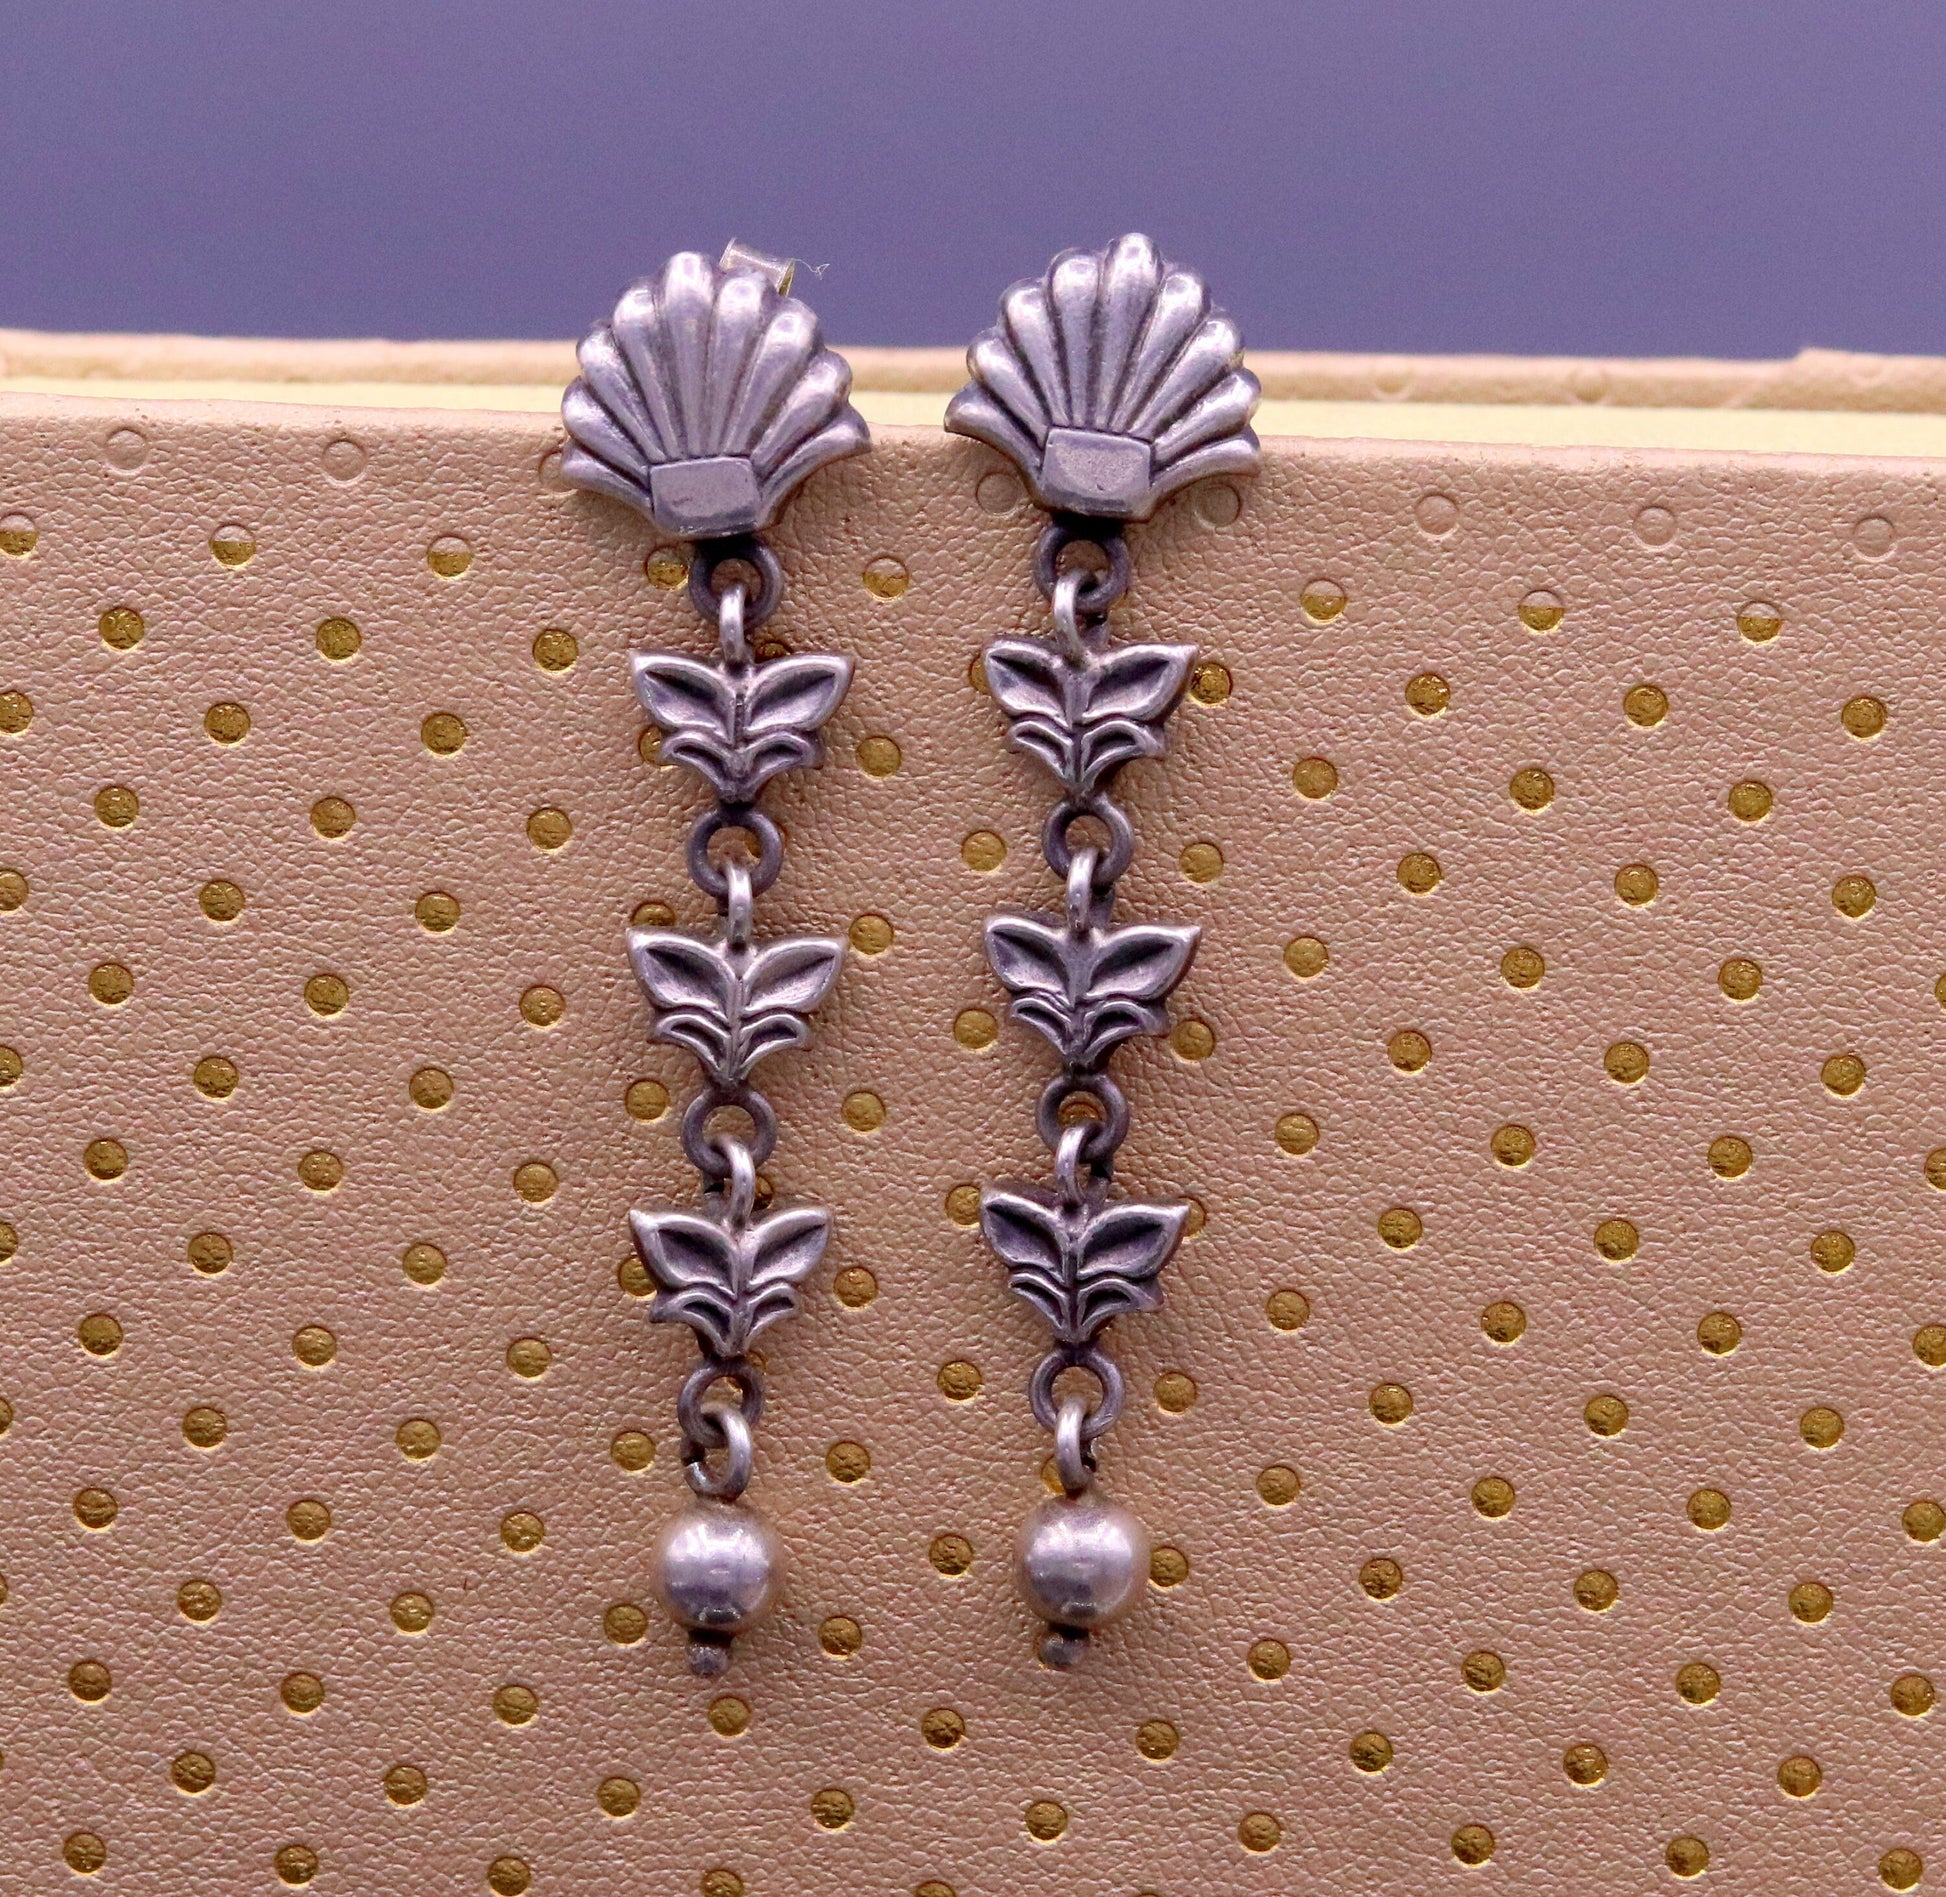 925 sterling silver handmade fabulous light weight stud earring pretty attractive gifting jewelry, oxidized tribal earring drop dangle  s821 - TRIBAL ORNAMENTS